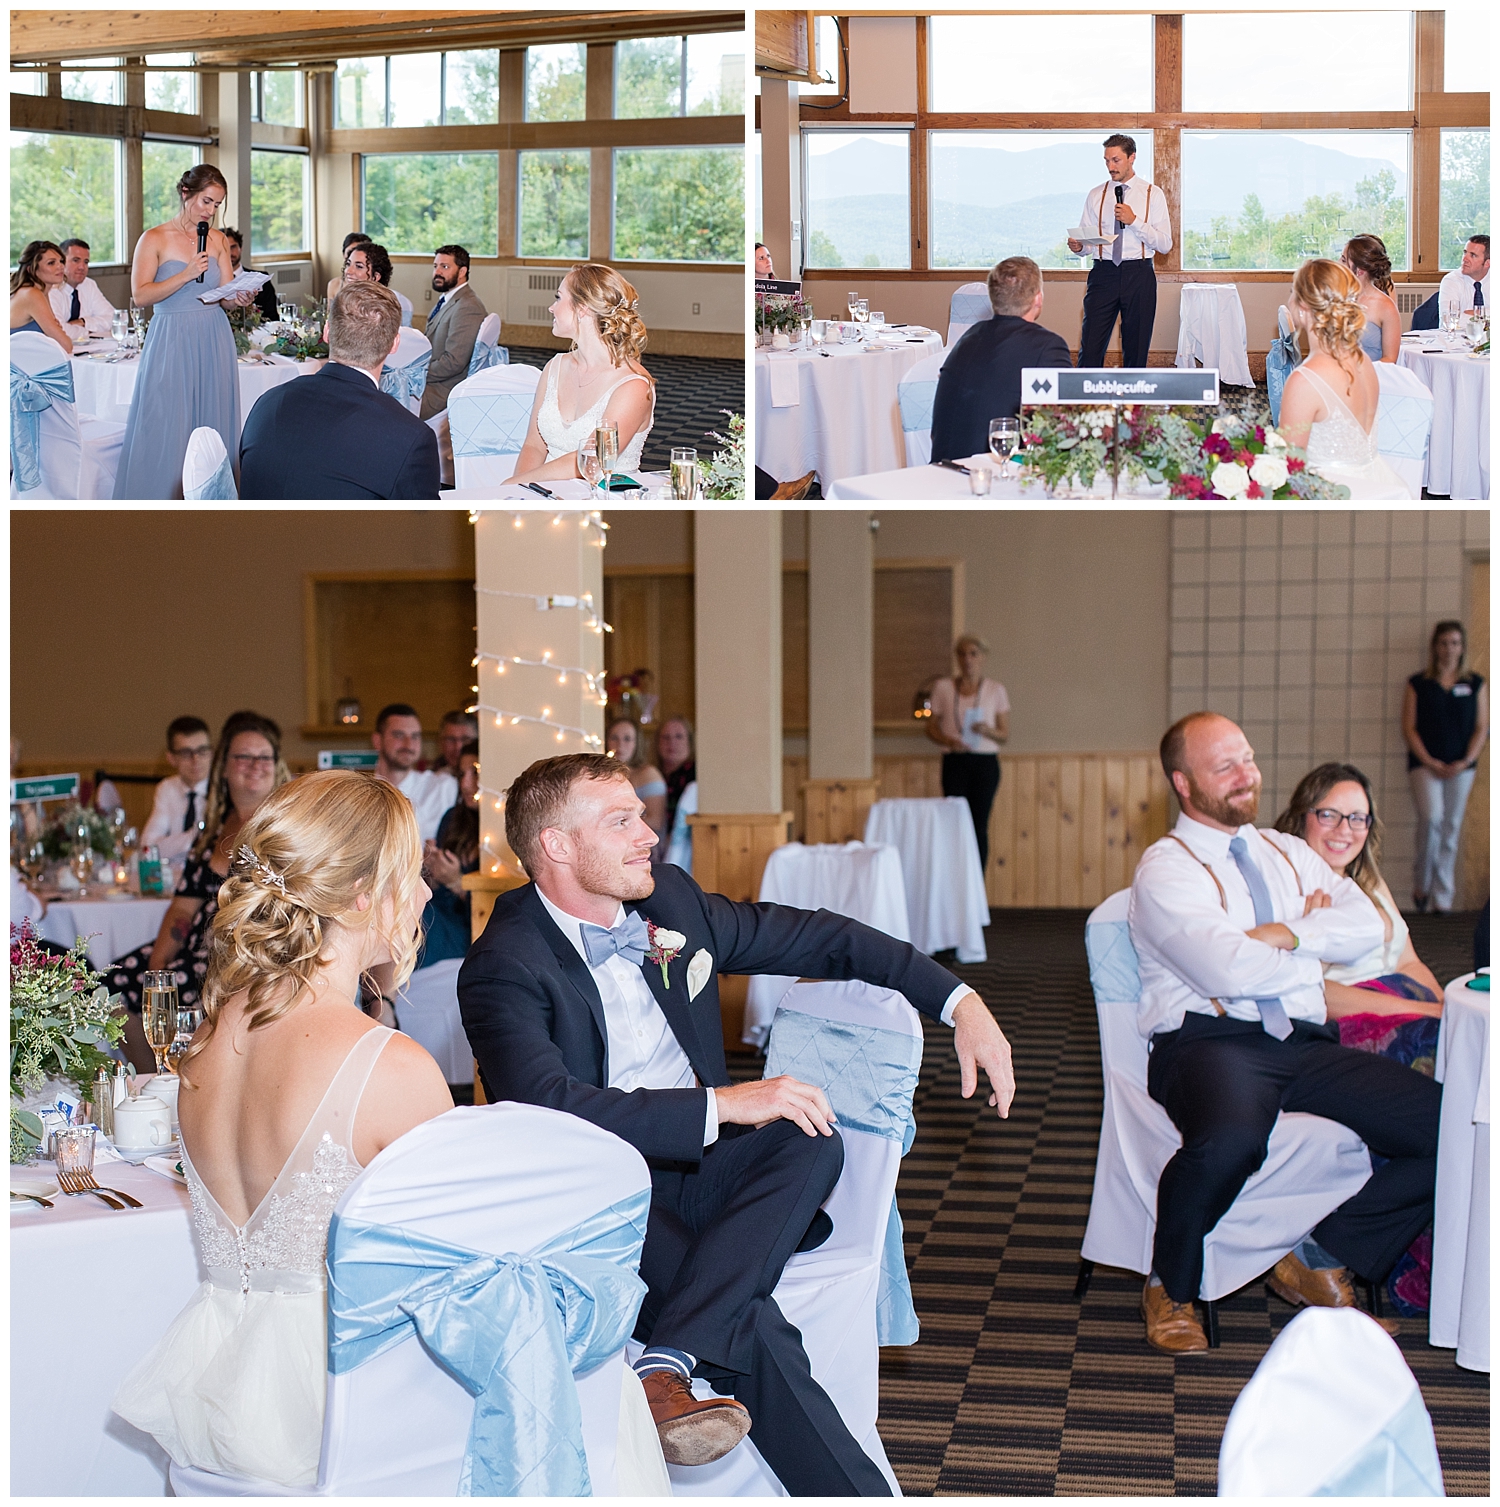 Best Man and Maid of Honor Toasts at Sugarloaf Mountain Resort Wedding in Maine, photos by Halie Olszowy.